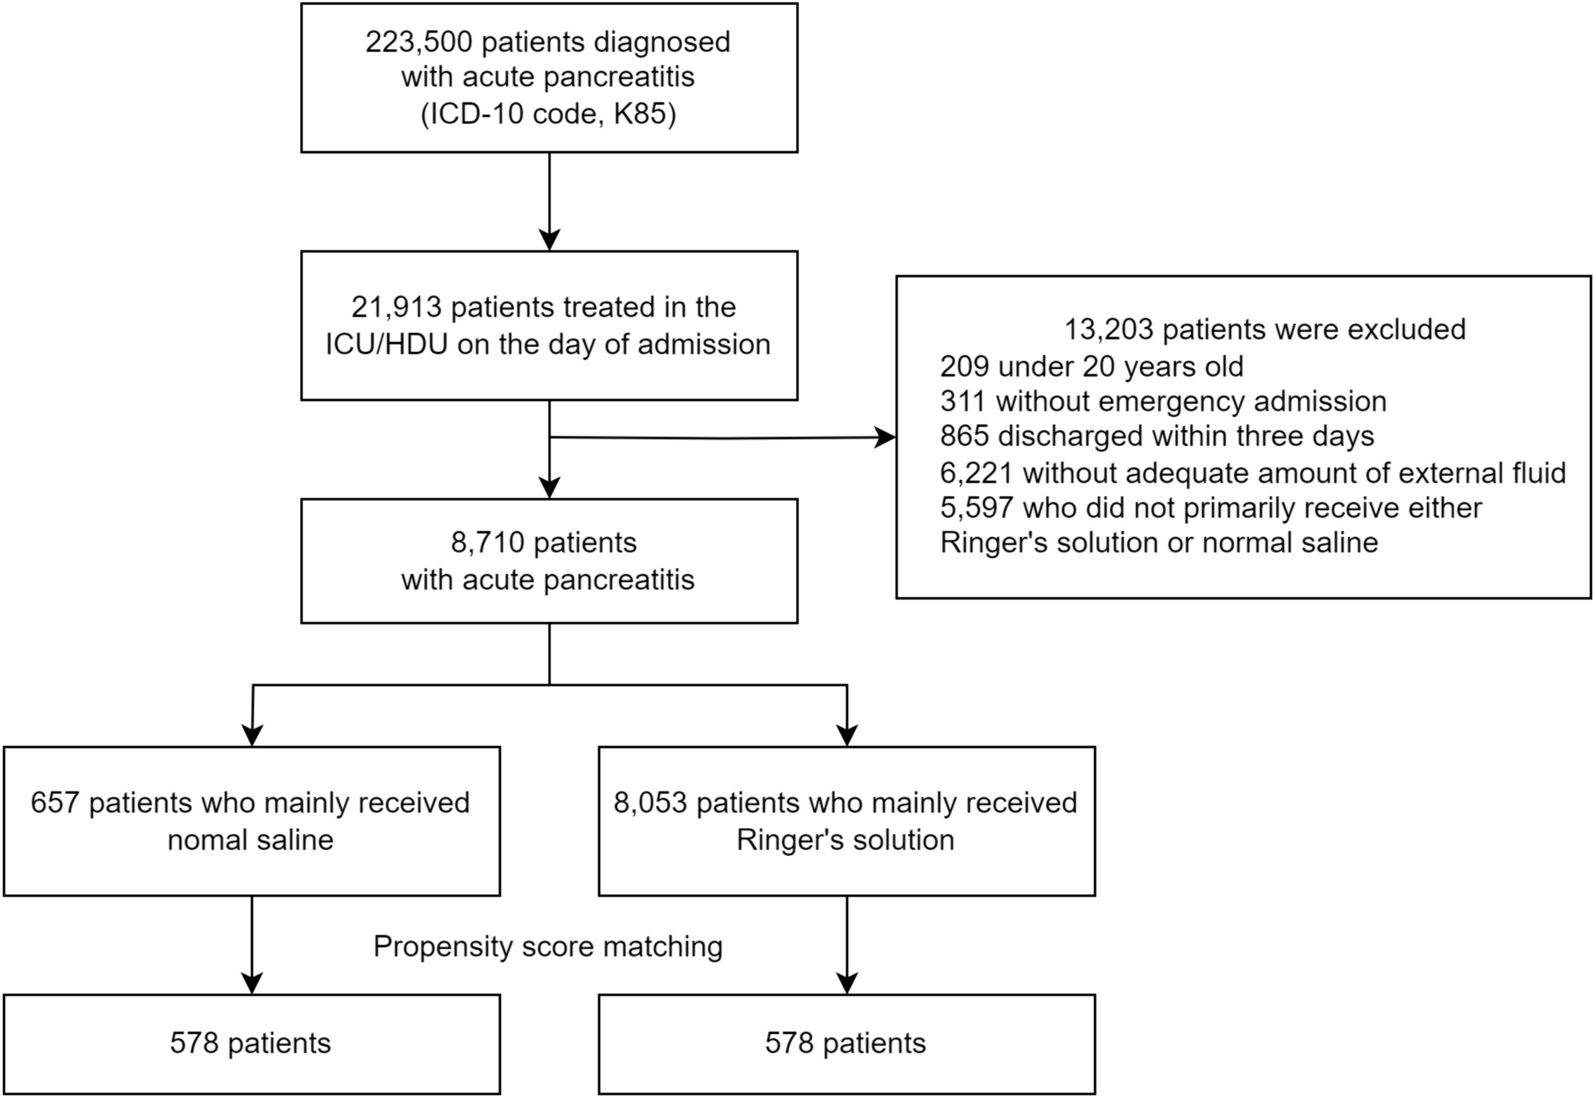 Normal saline versus Ringer’s solution and critical-illness mortality in acute pancreatitis: a nationwide inpatient database study